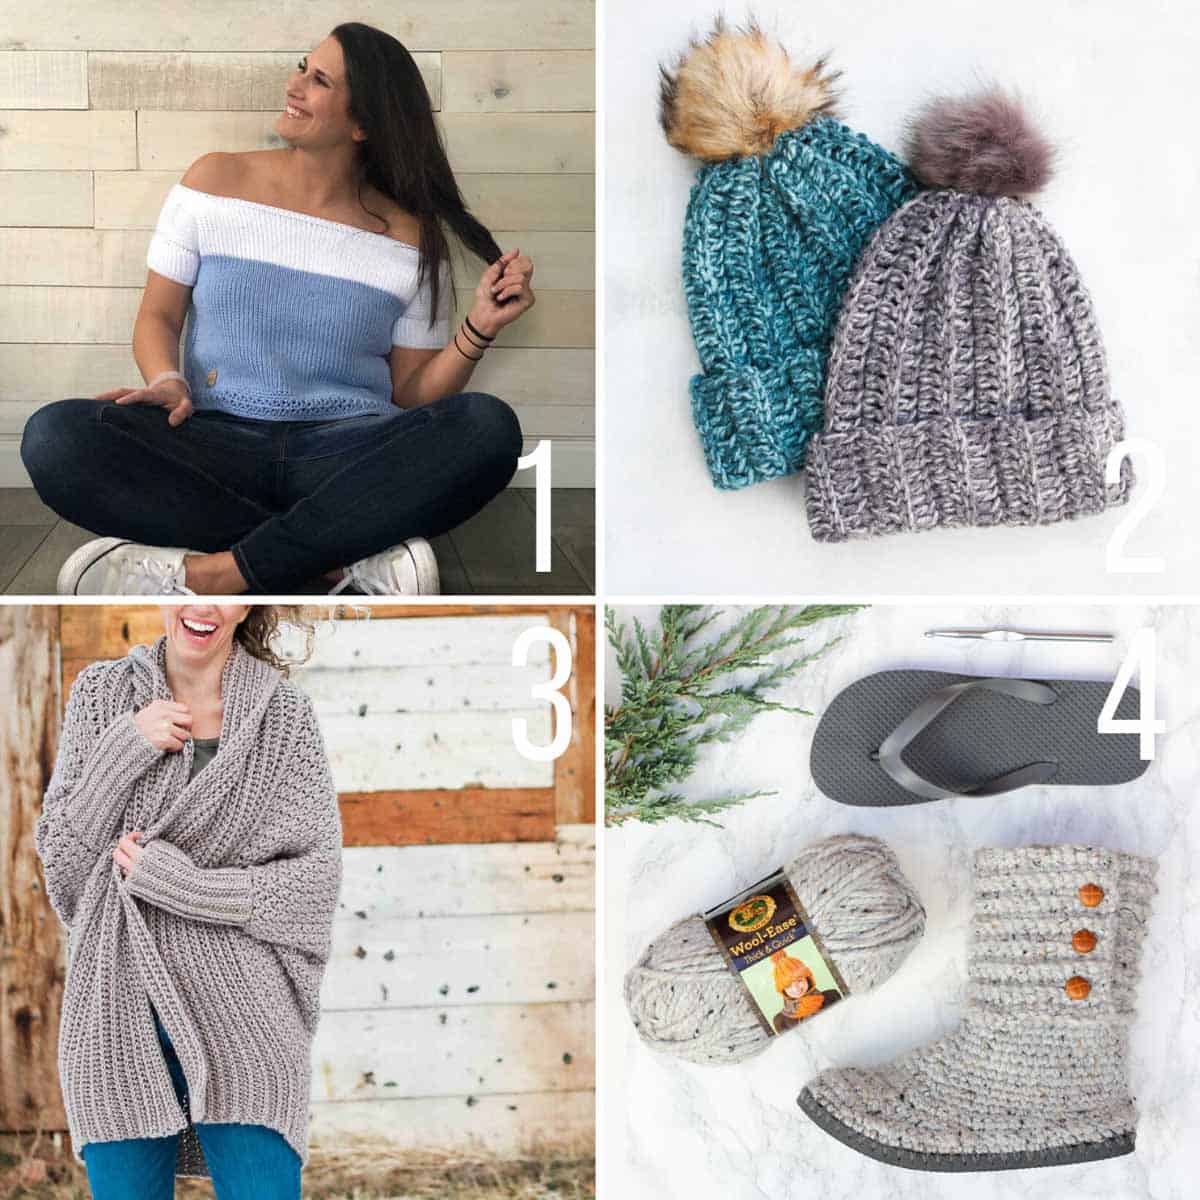 Four free crochet patterns from Make & Do Crew including an easy crochet beanie, a Tunisian crochet top, an easy sweater and crochet boots with flip flop soles.